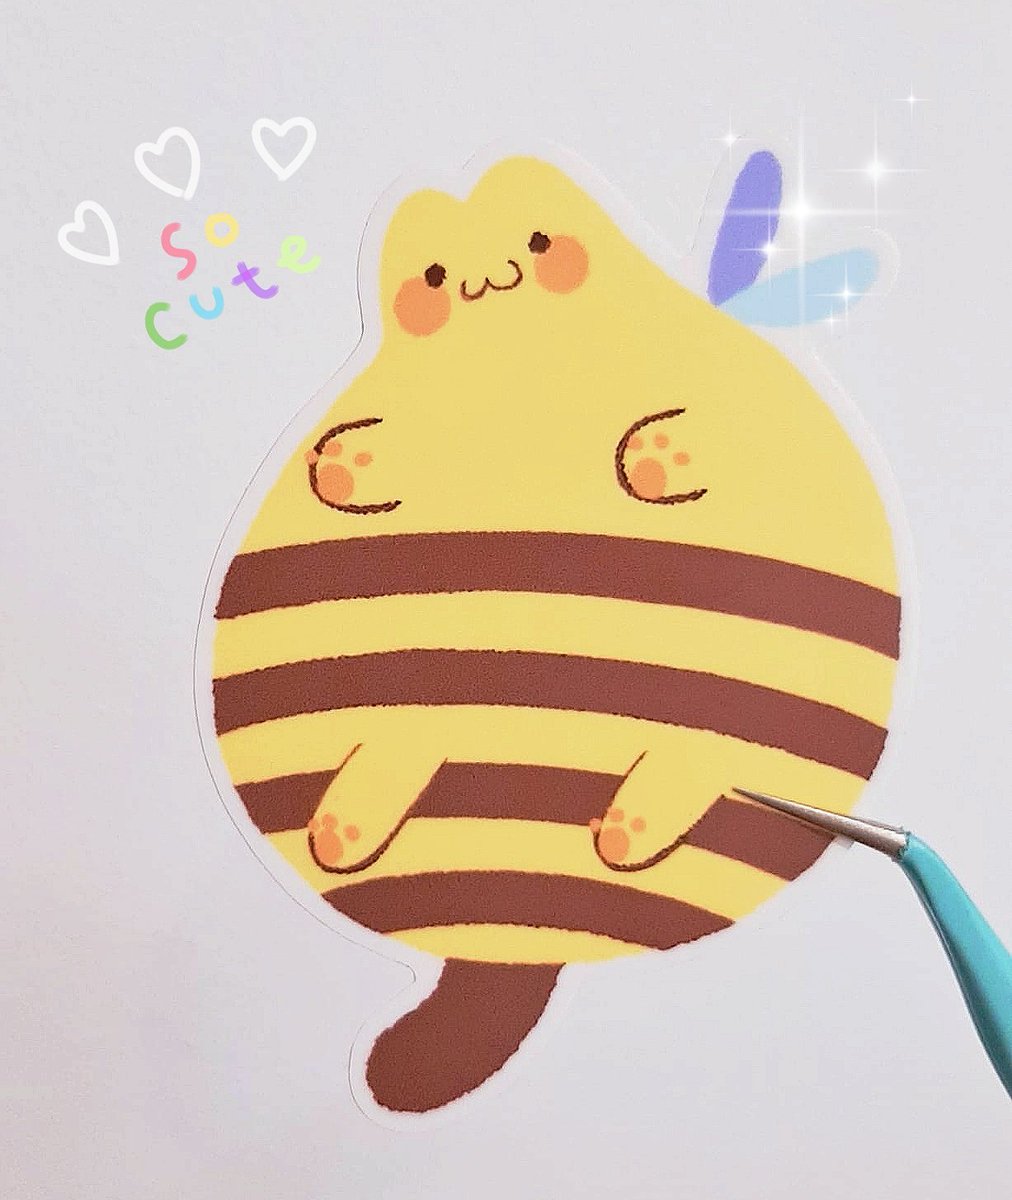 The Boobee Cat sticker samples are here! Look how cute he is...🥺🐝 #TheBoobeeCat